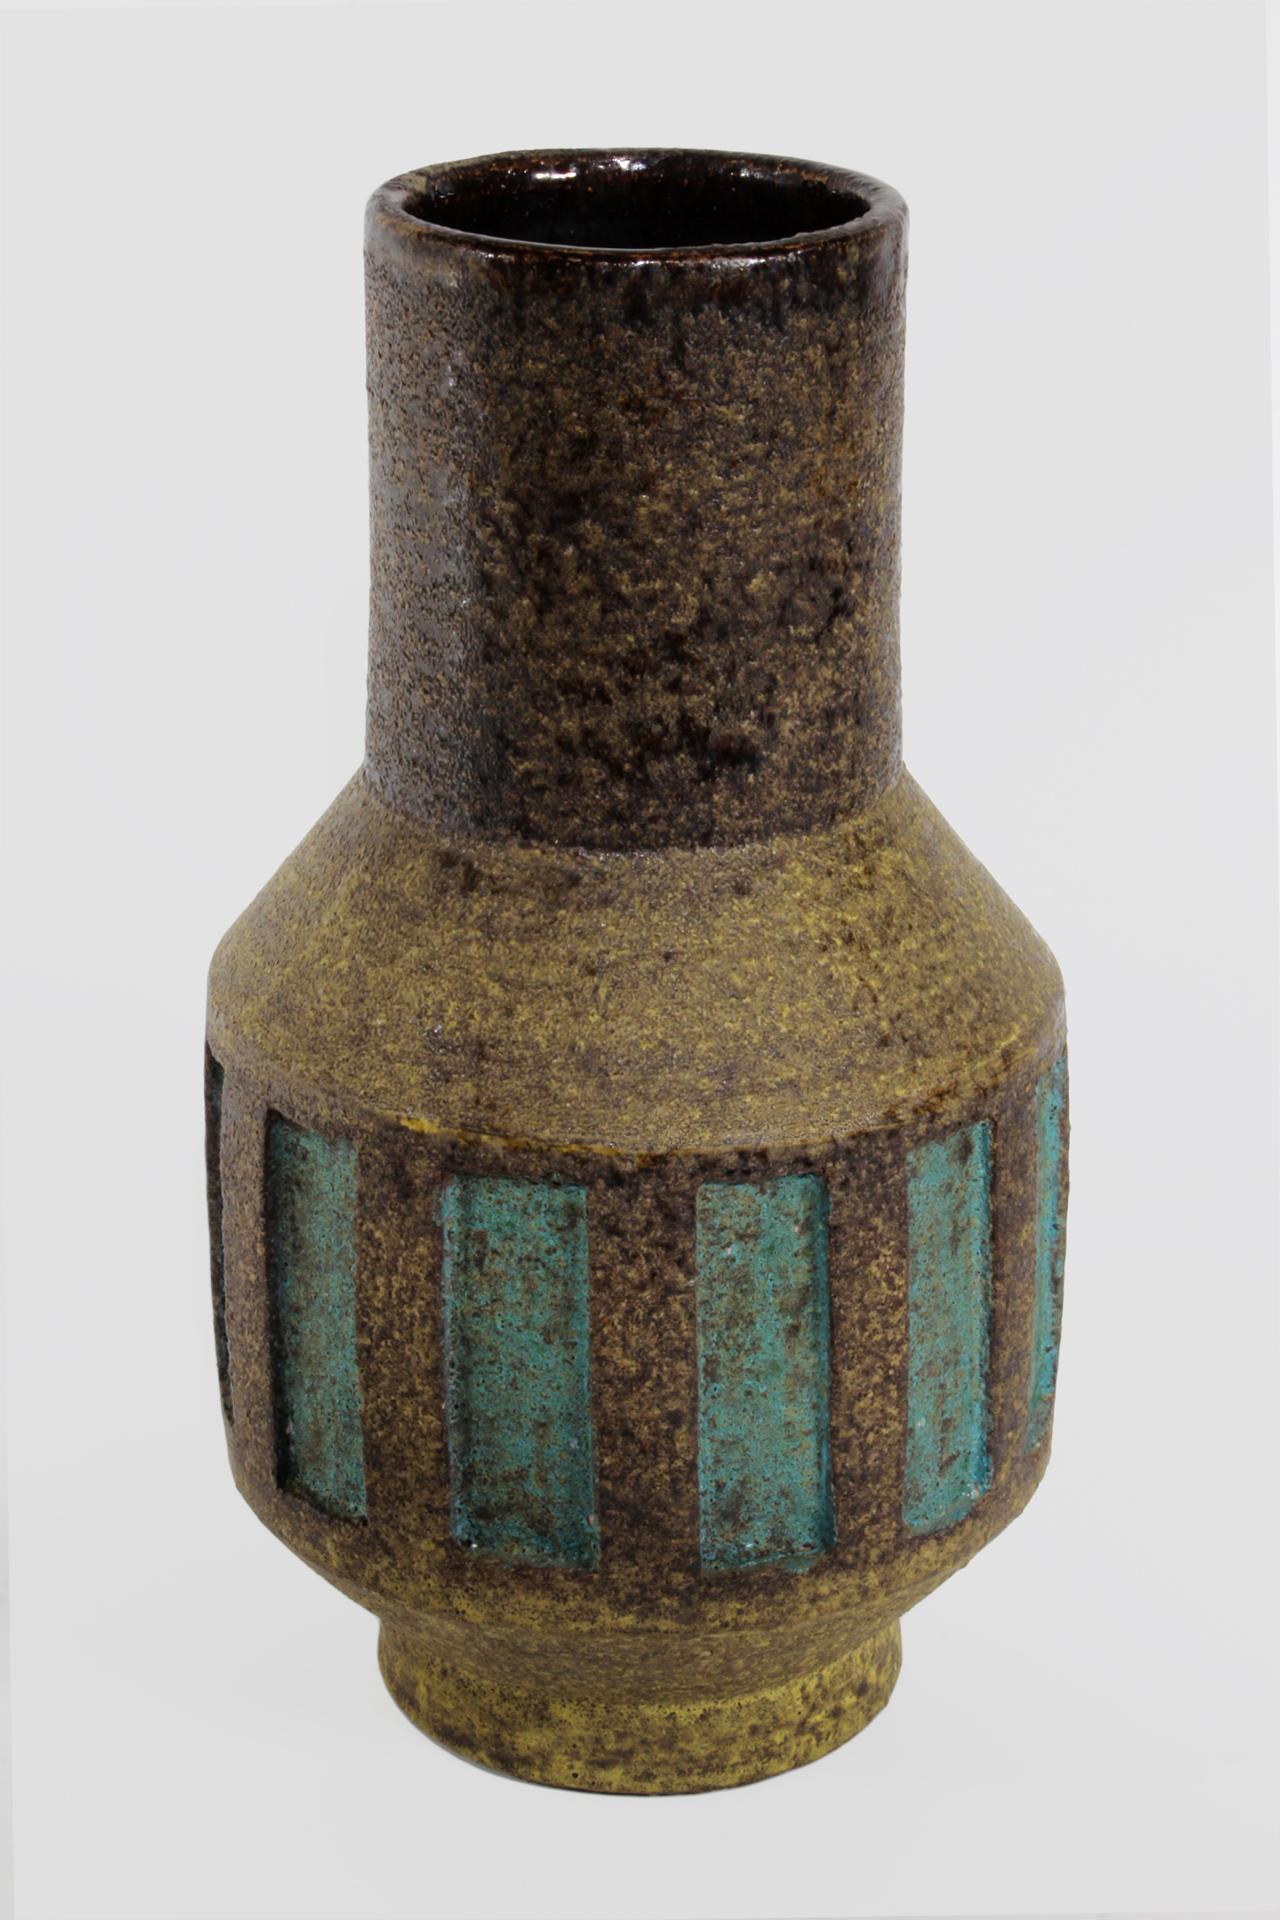 A hand-thrown stoneware vase by master ceramicist Aldo Londi for Bitossi, circa 1950. Subtle in every detail from the heavily textured clay body surface to a shifting oxide coloration of brown, yellow and black to the gently recessed turquoise